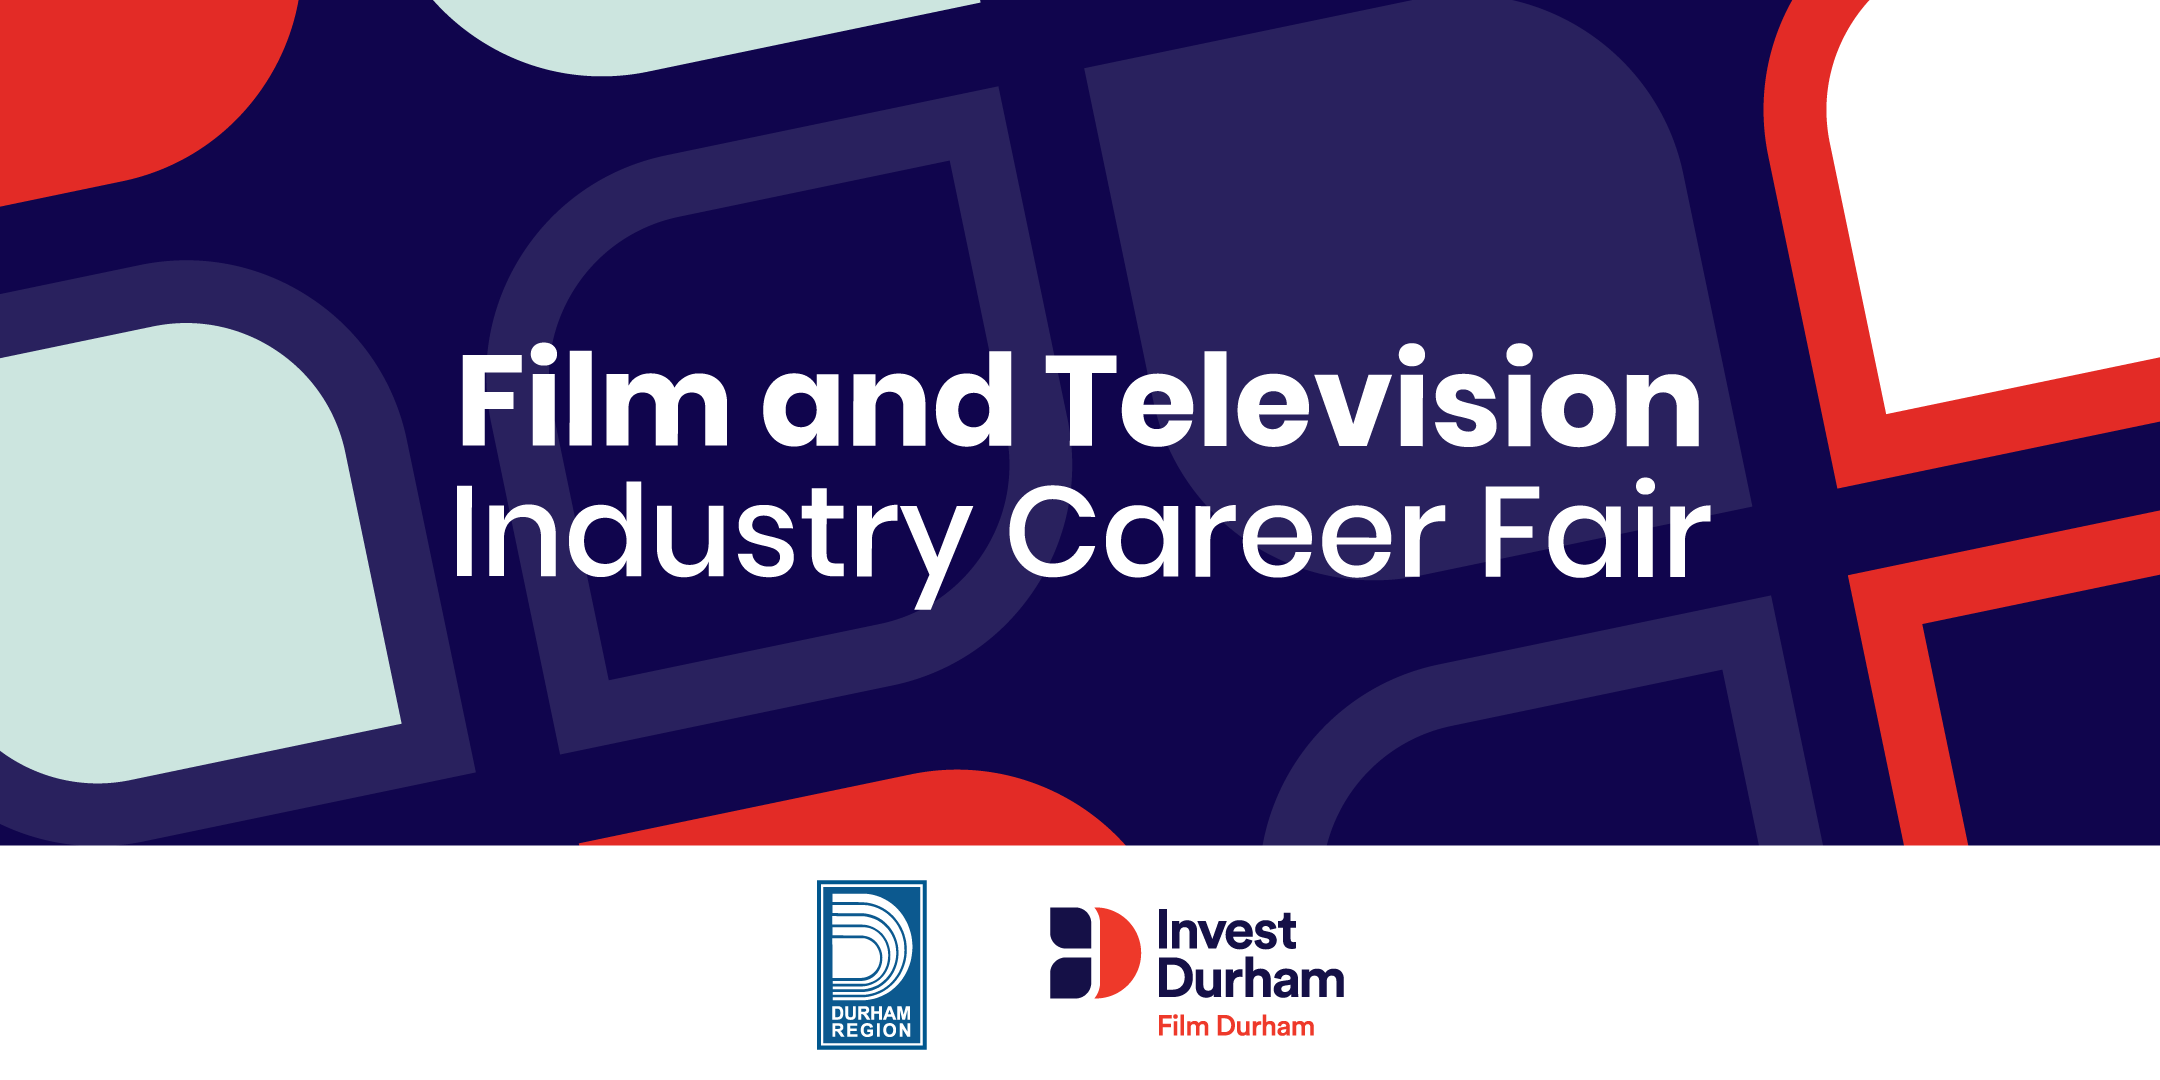 Graphic that reads, "Film and Television Industry Career Fair", with the Durham Region and Film Durham logos.